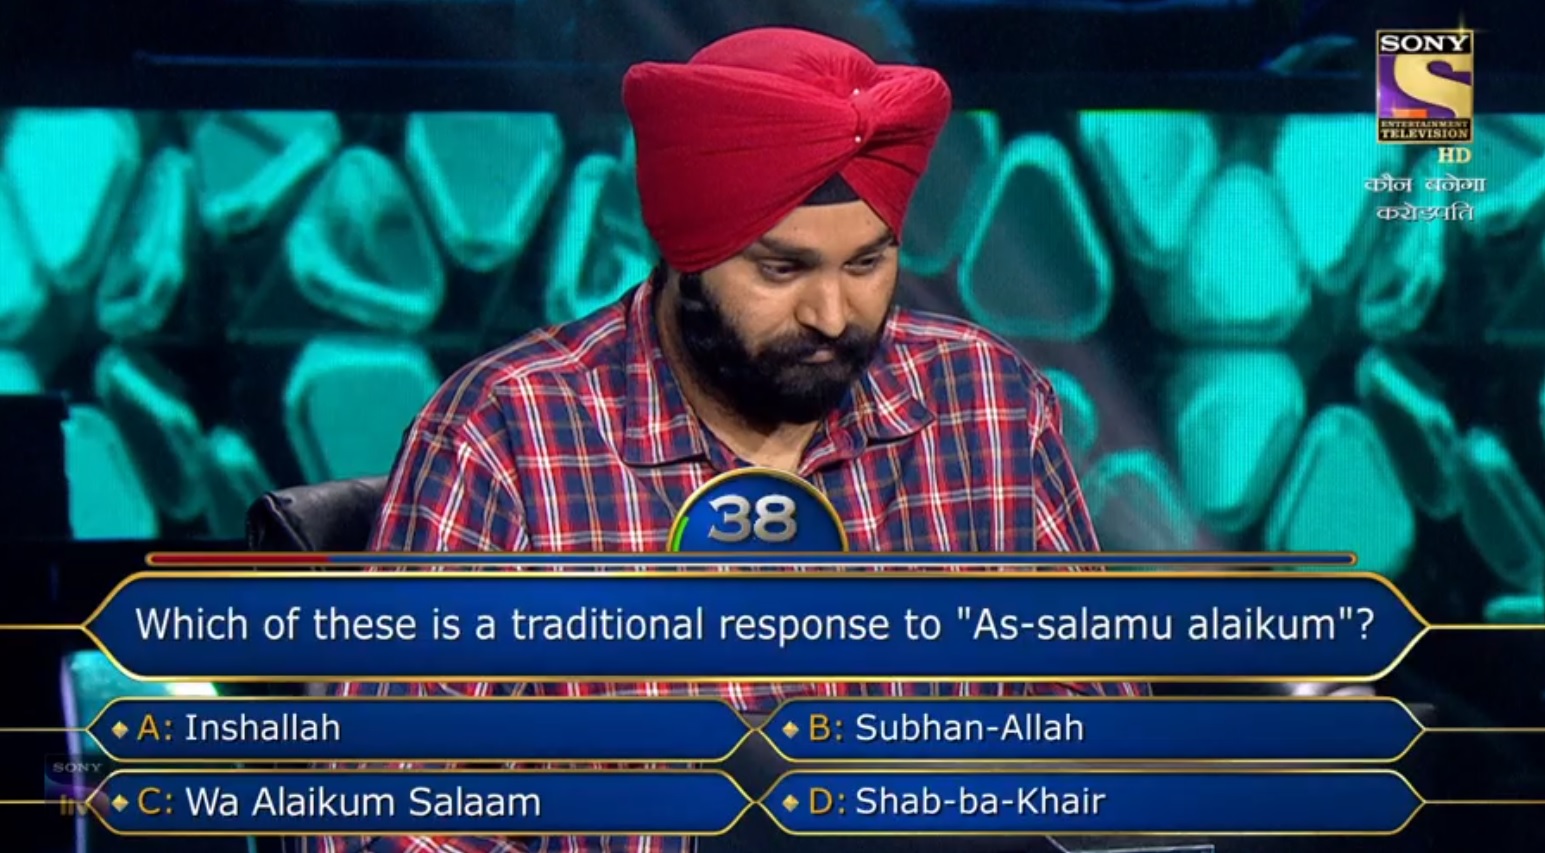 Ques : Which of these is a traditional response to “As-salamu alaikum”?